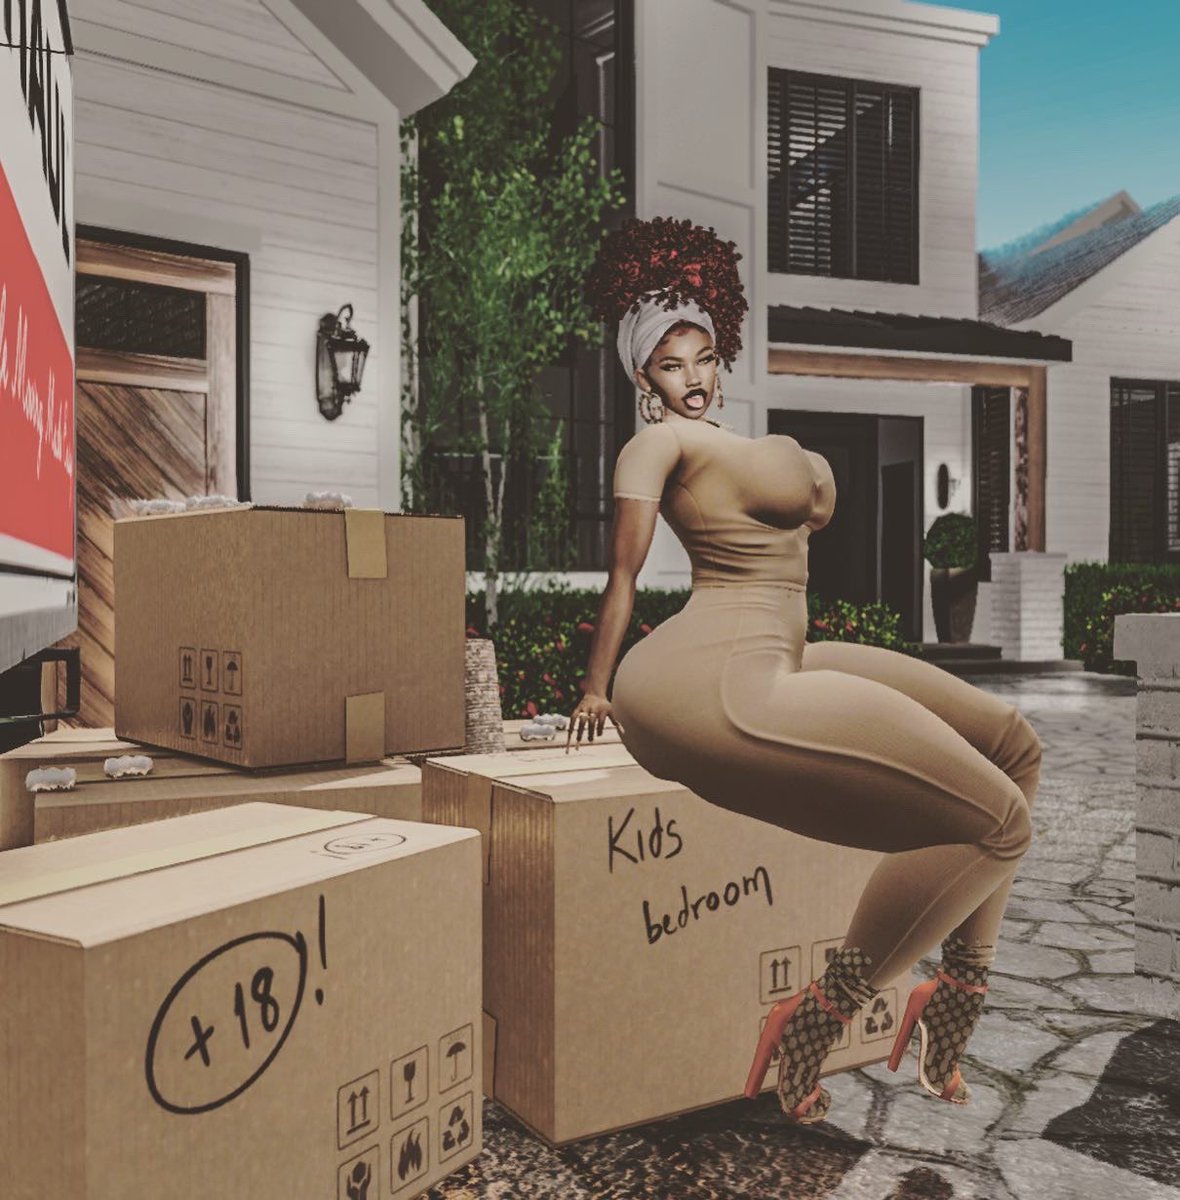 New house who dis?!

#moveday 
#metabae
#SecondLife 
#secondlifers